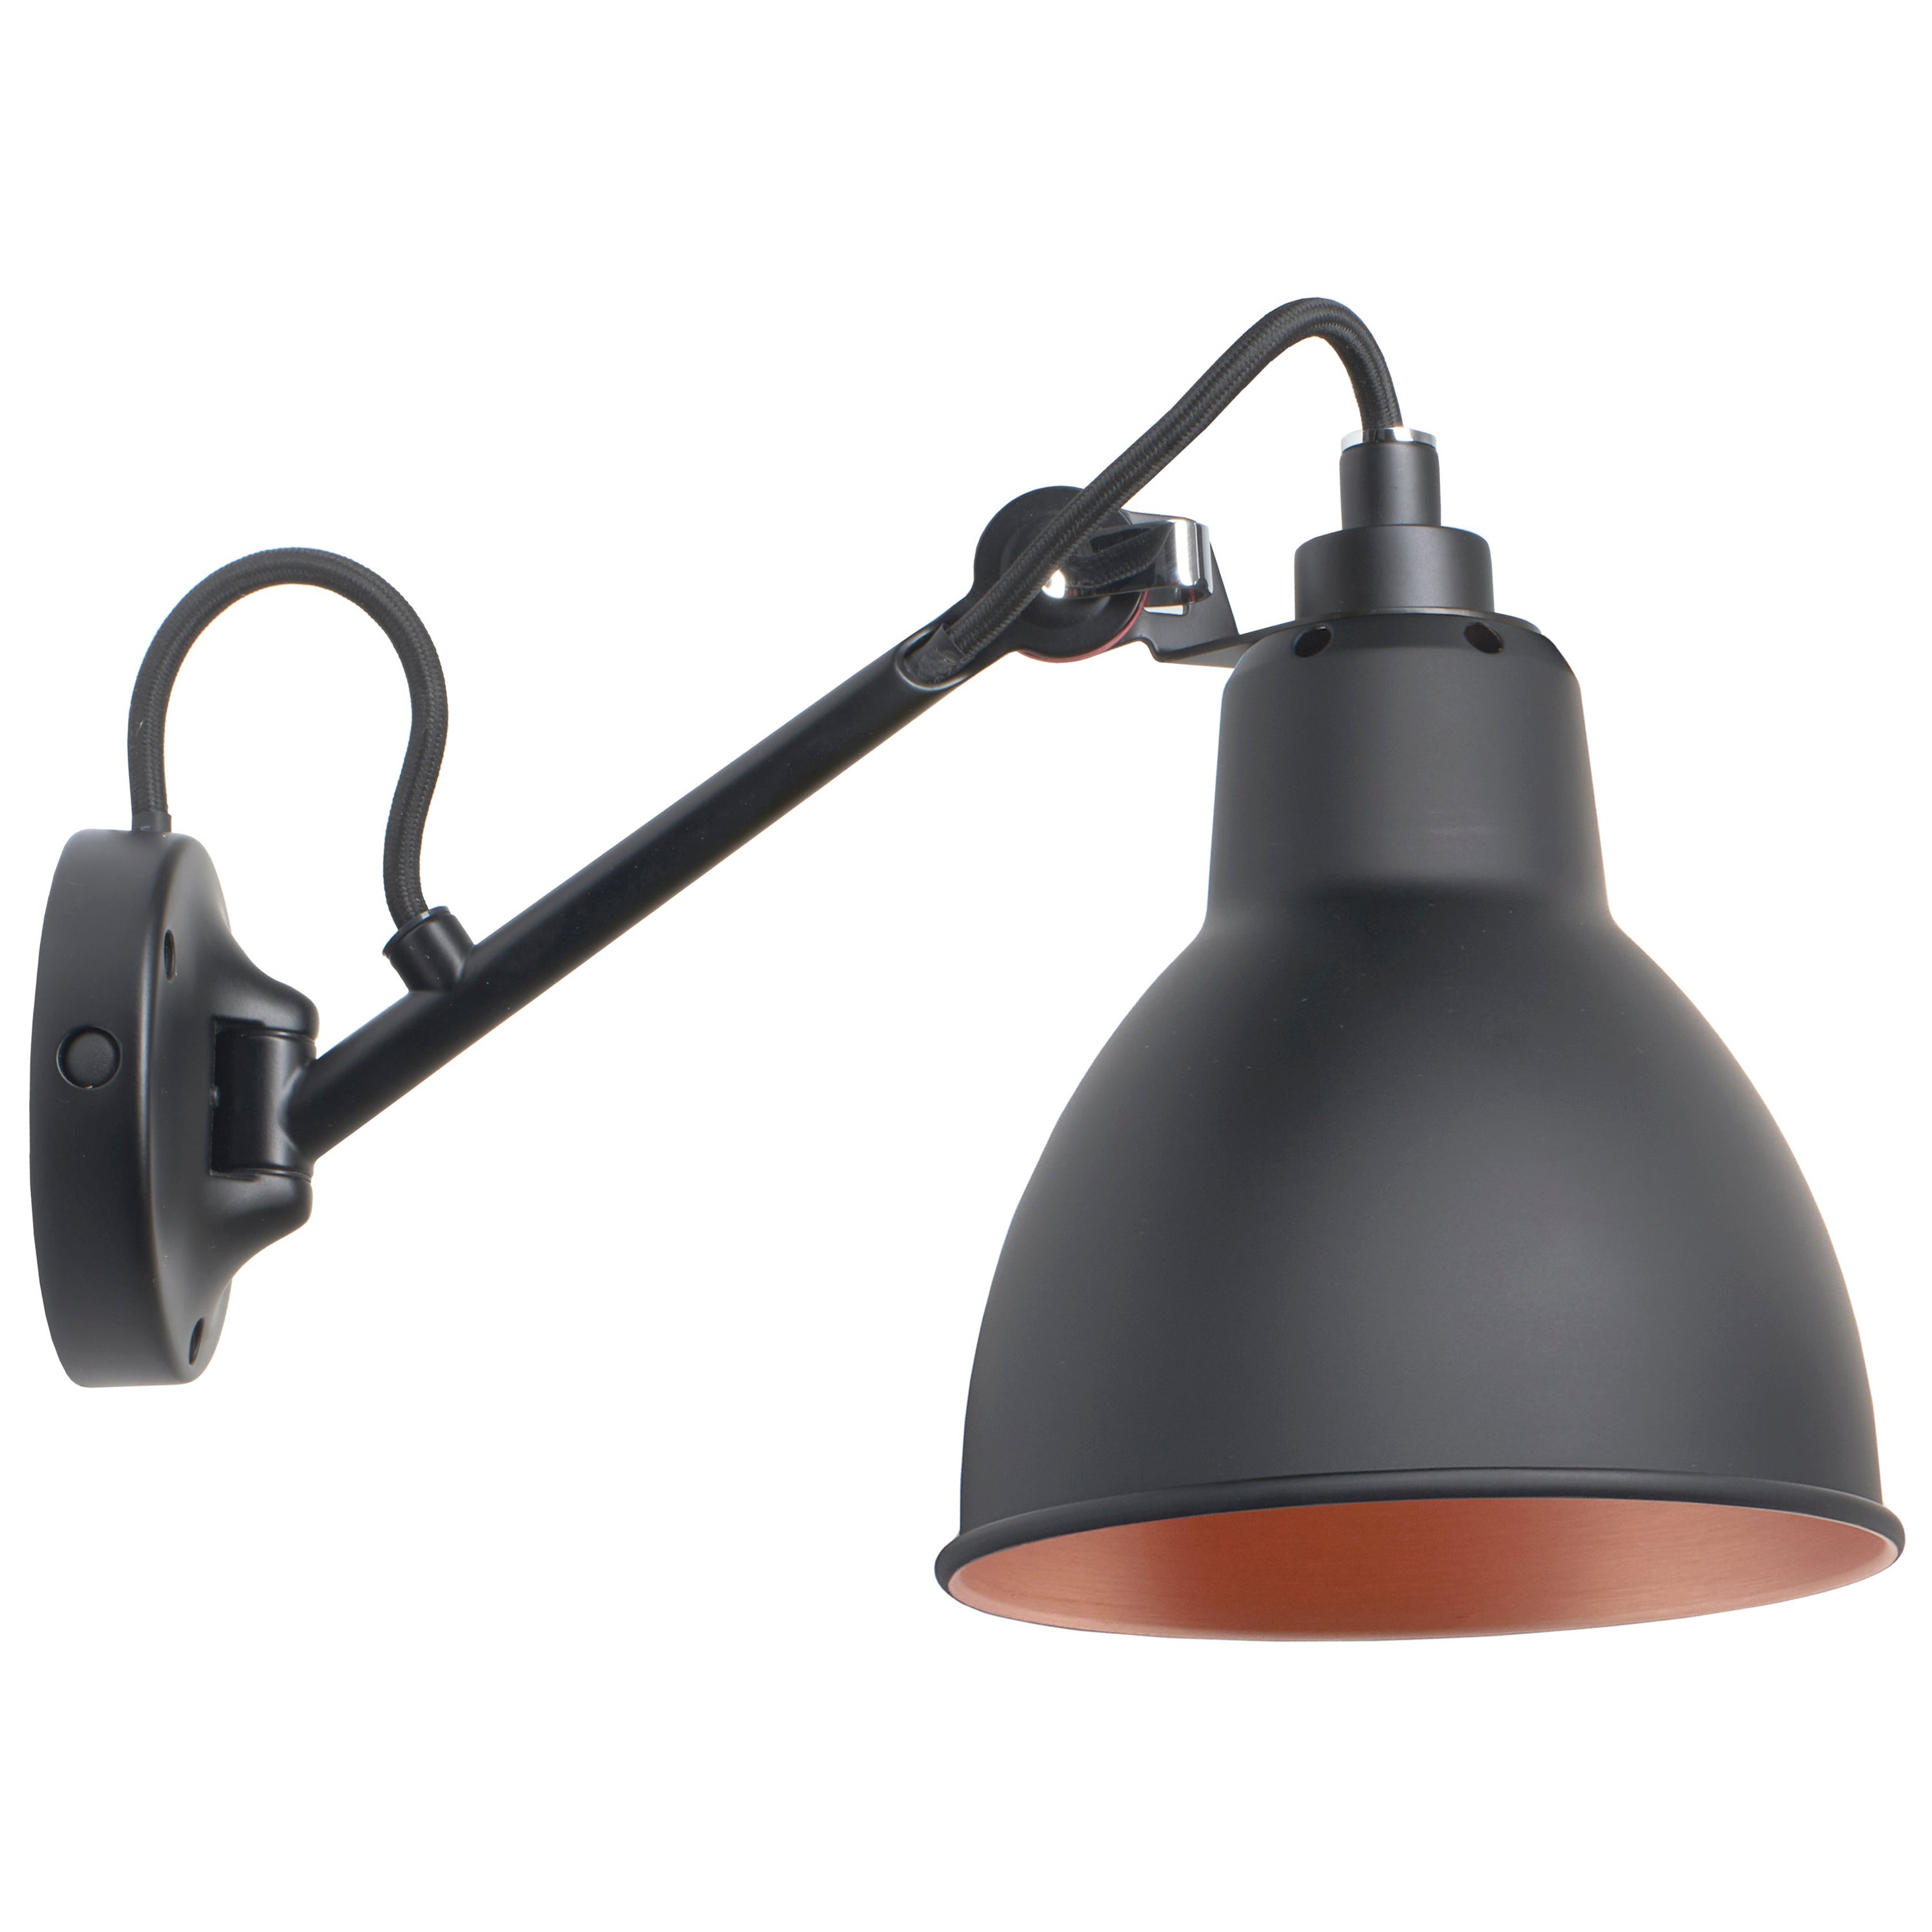 DCW Editions La Lampe Gras N°104 Wall Lamp in Black Arm and Black Copper Shade